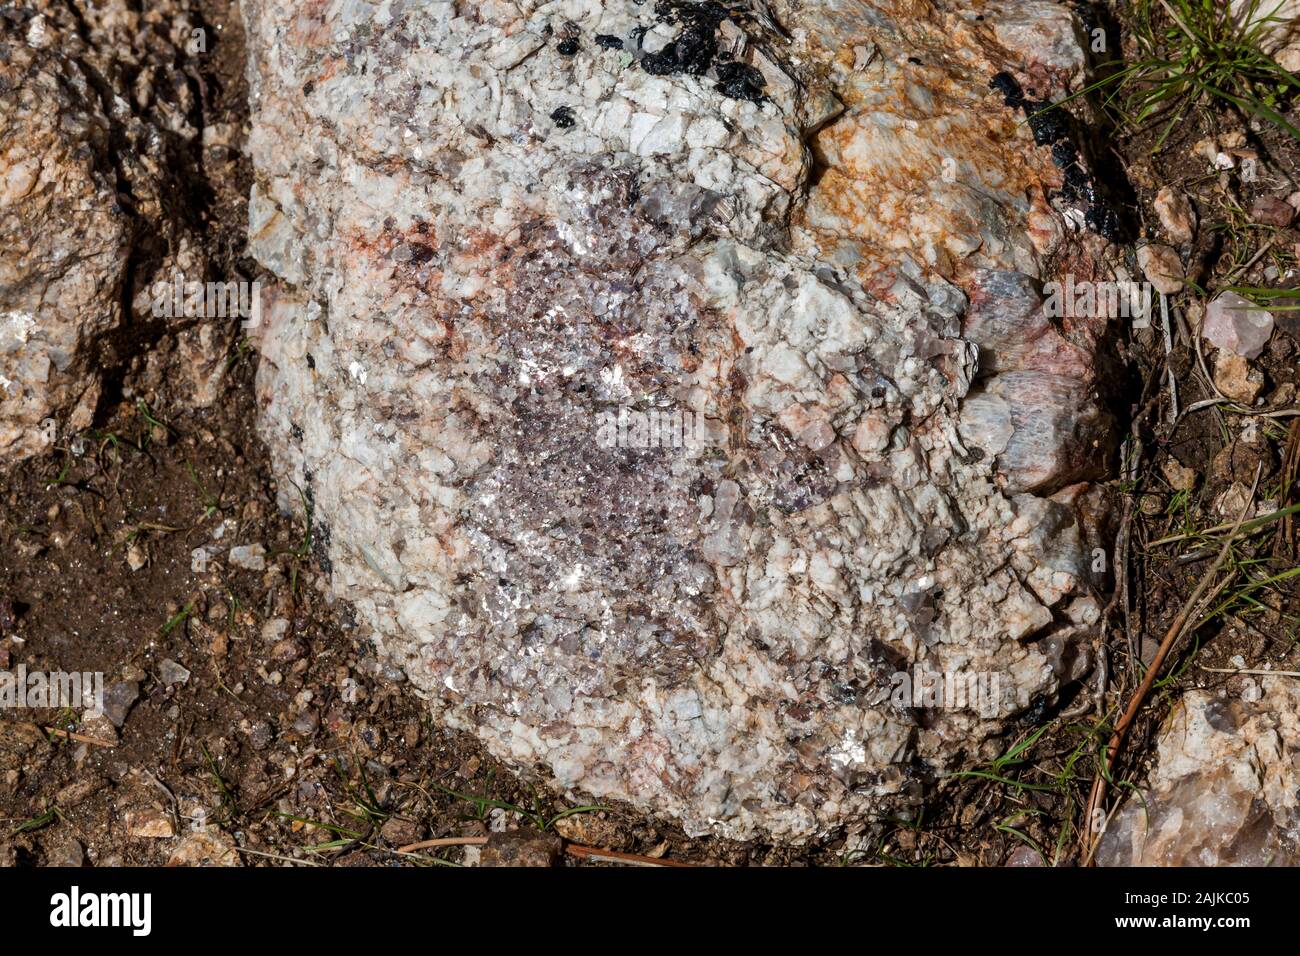 A large rock embedded in the ground that is a composition of quartz crystal, granite, and mica that sparkles in the sunshine. Stock Photo